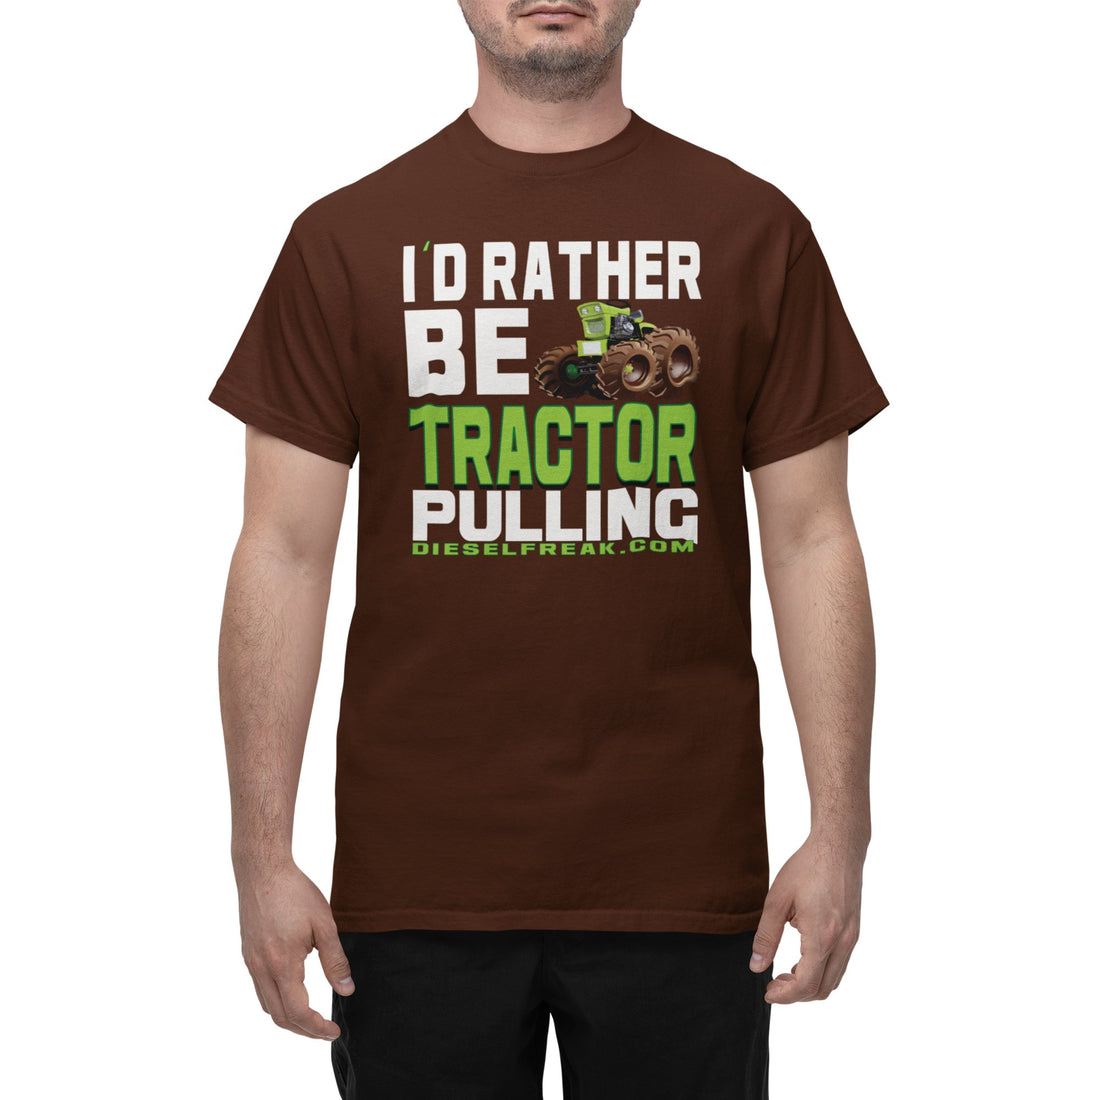 I'd Rather Be Tractor Pulling T-Shirt - Diesel Freak